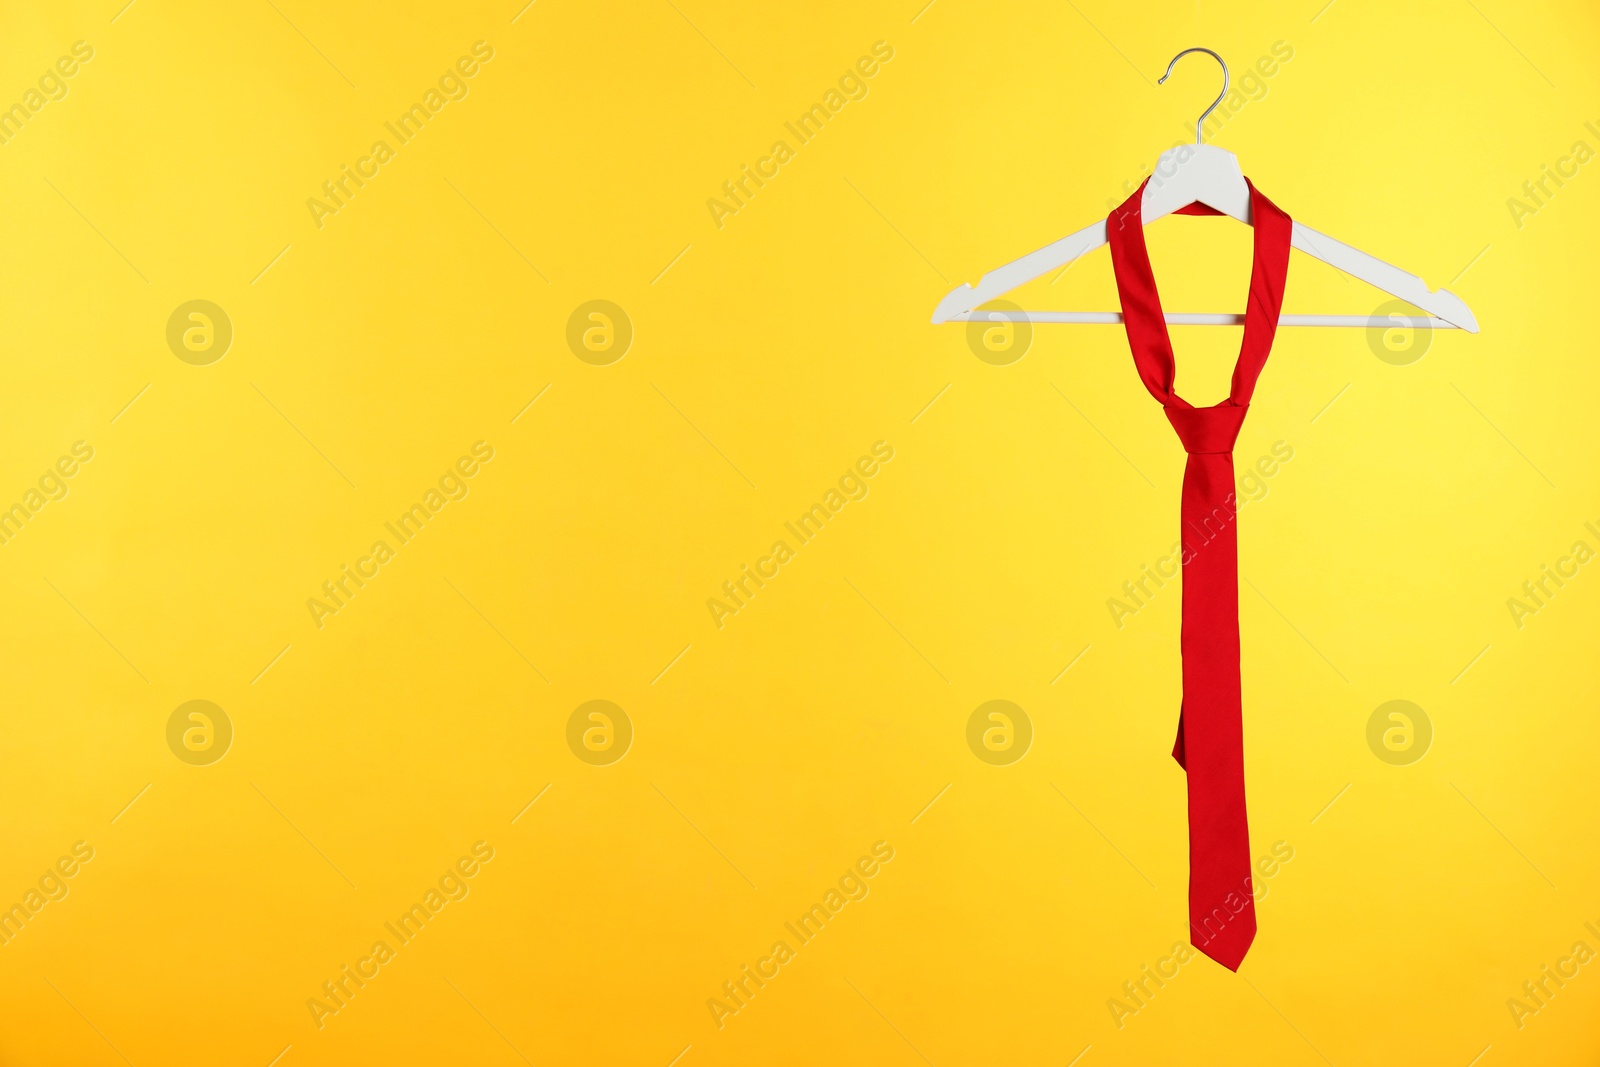 Photo of Hanger with red tie against orange background. Space for text